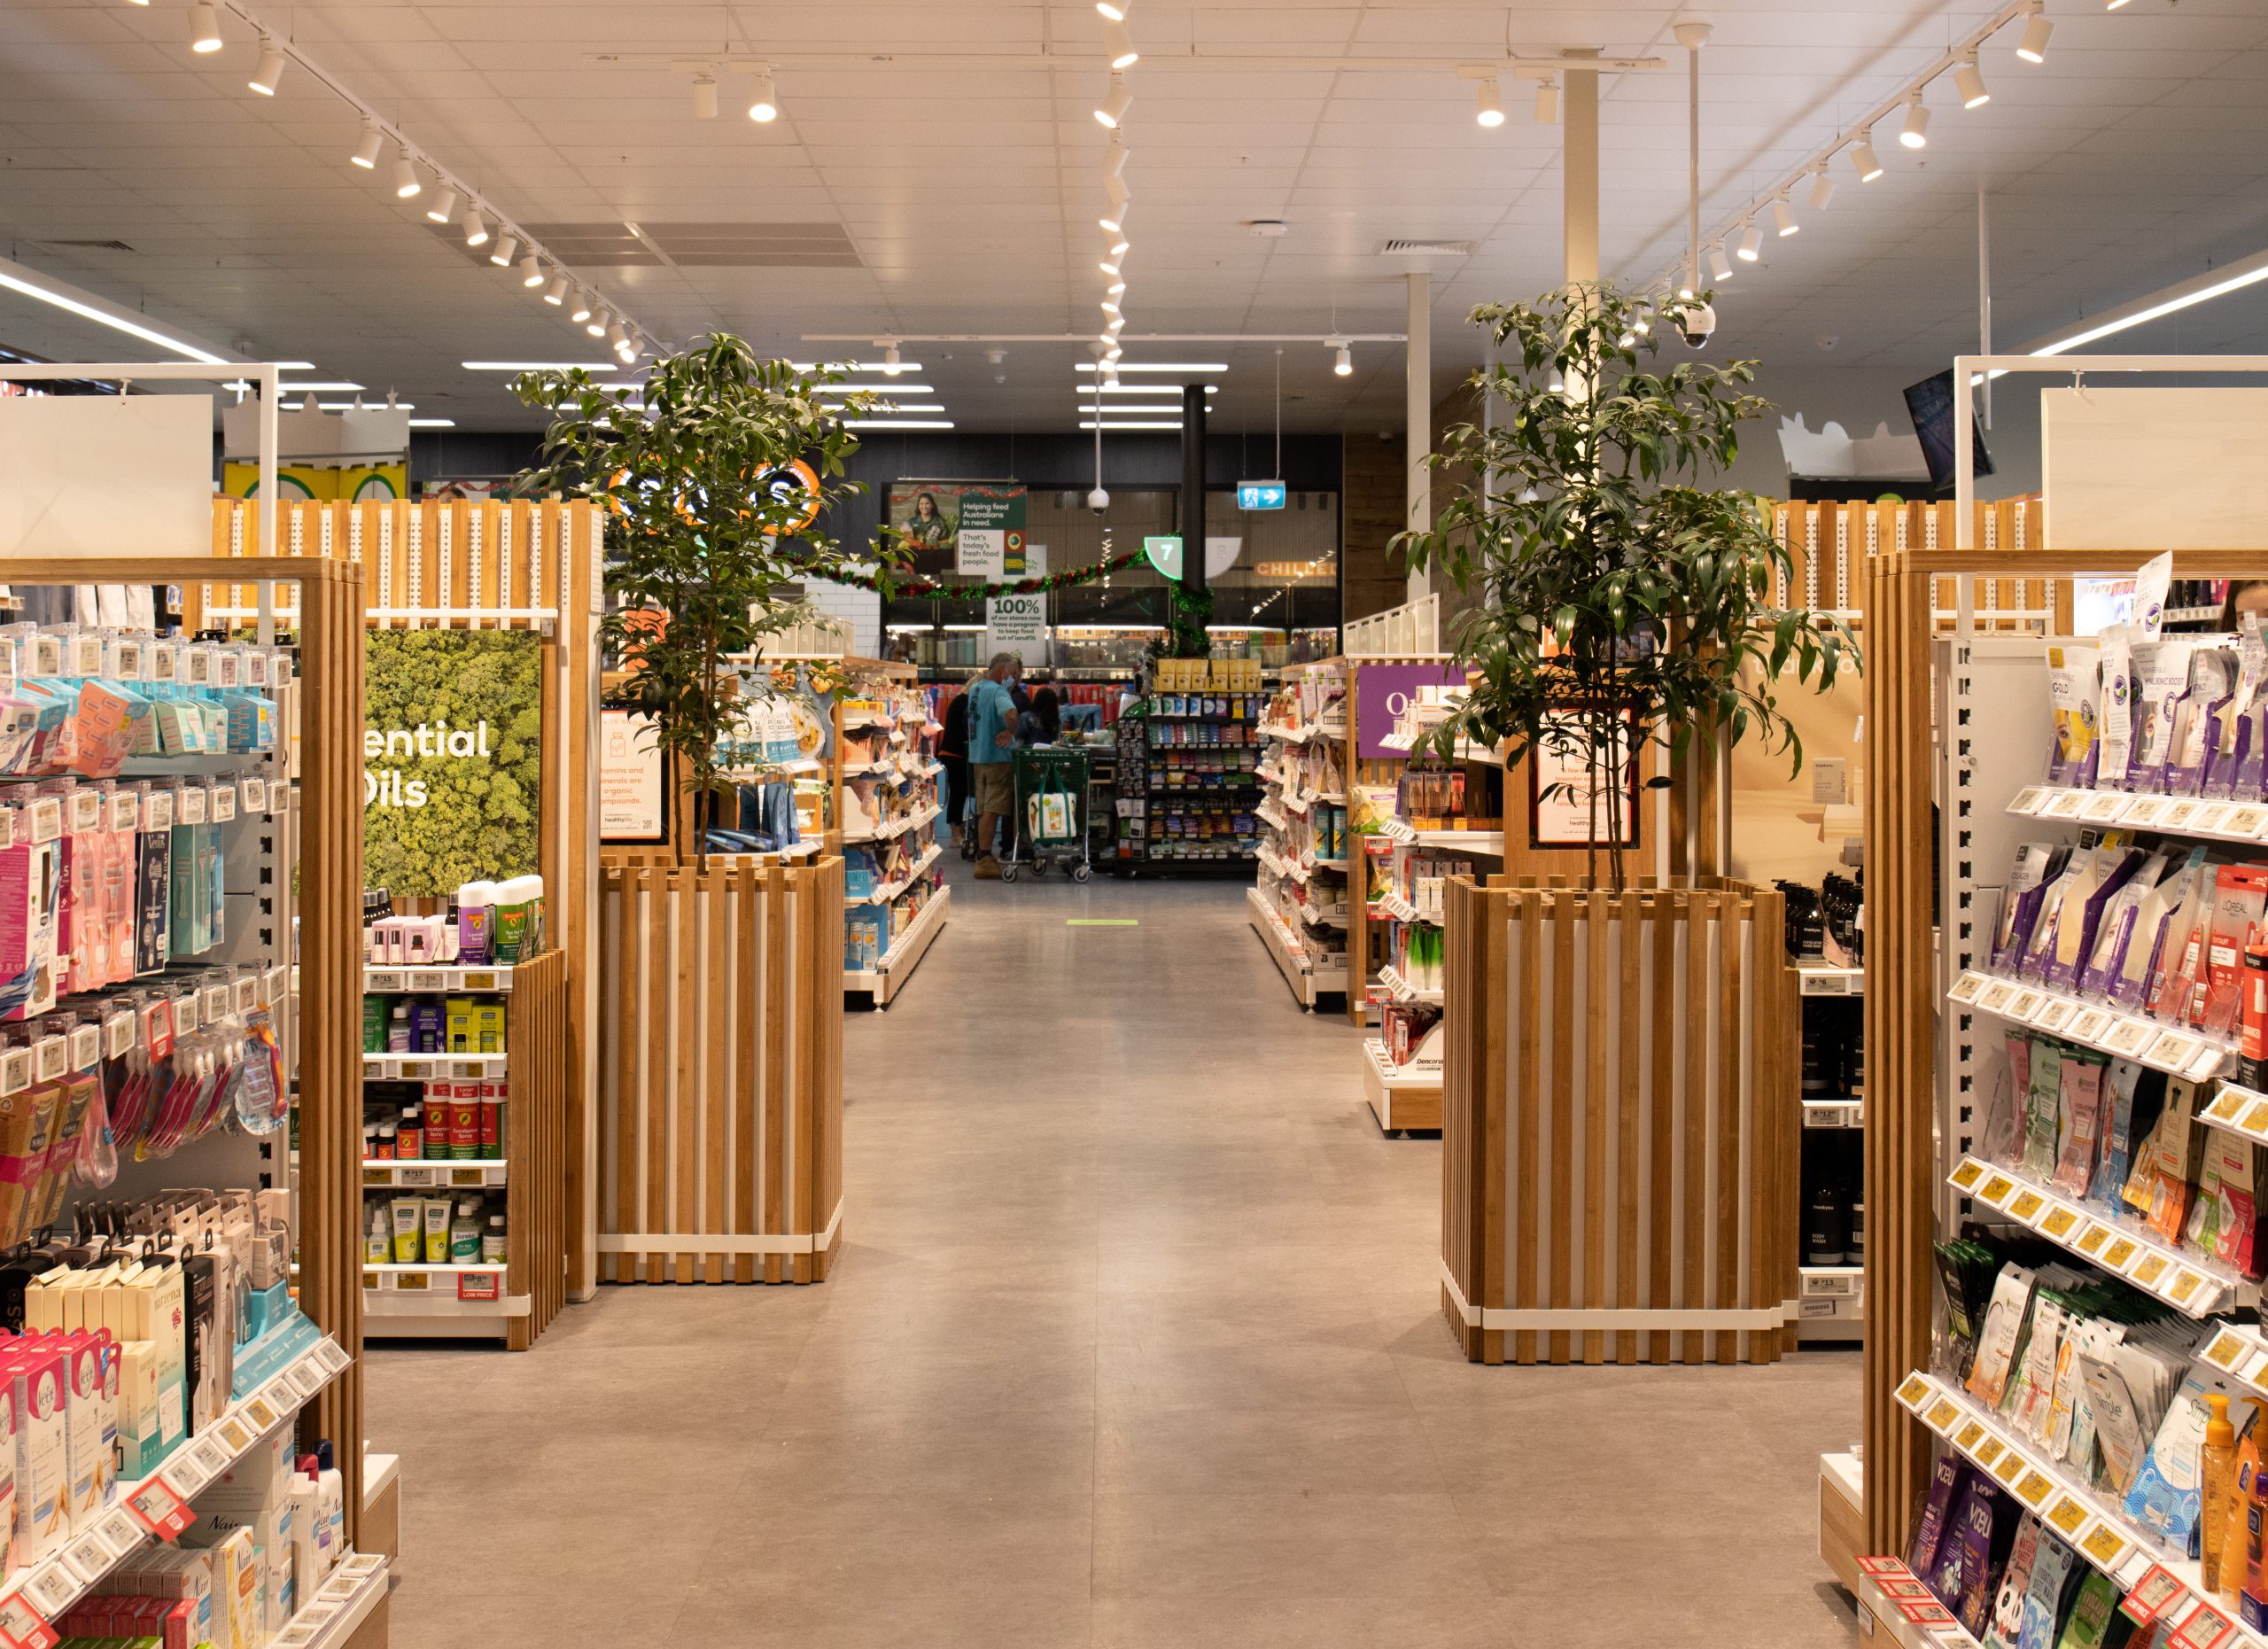 Woolworths Continues To Champion Bamboo With The Opening of A New Health & Wellness Department in Glenrose